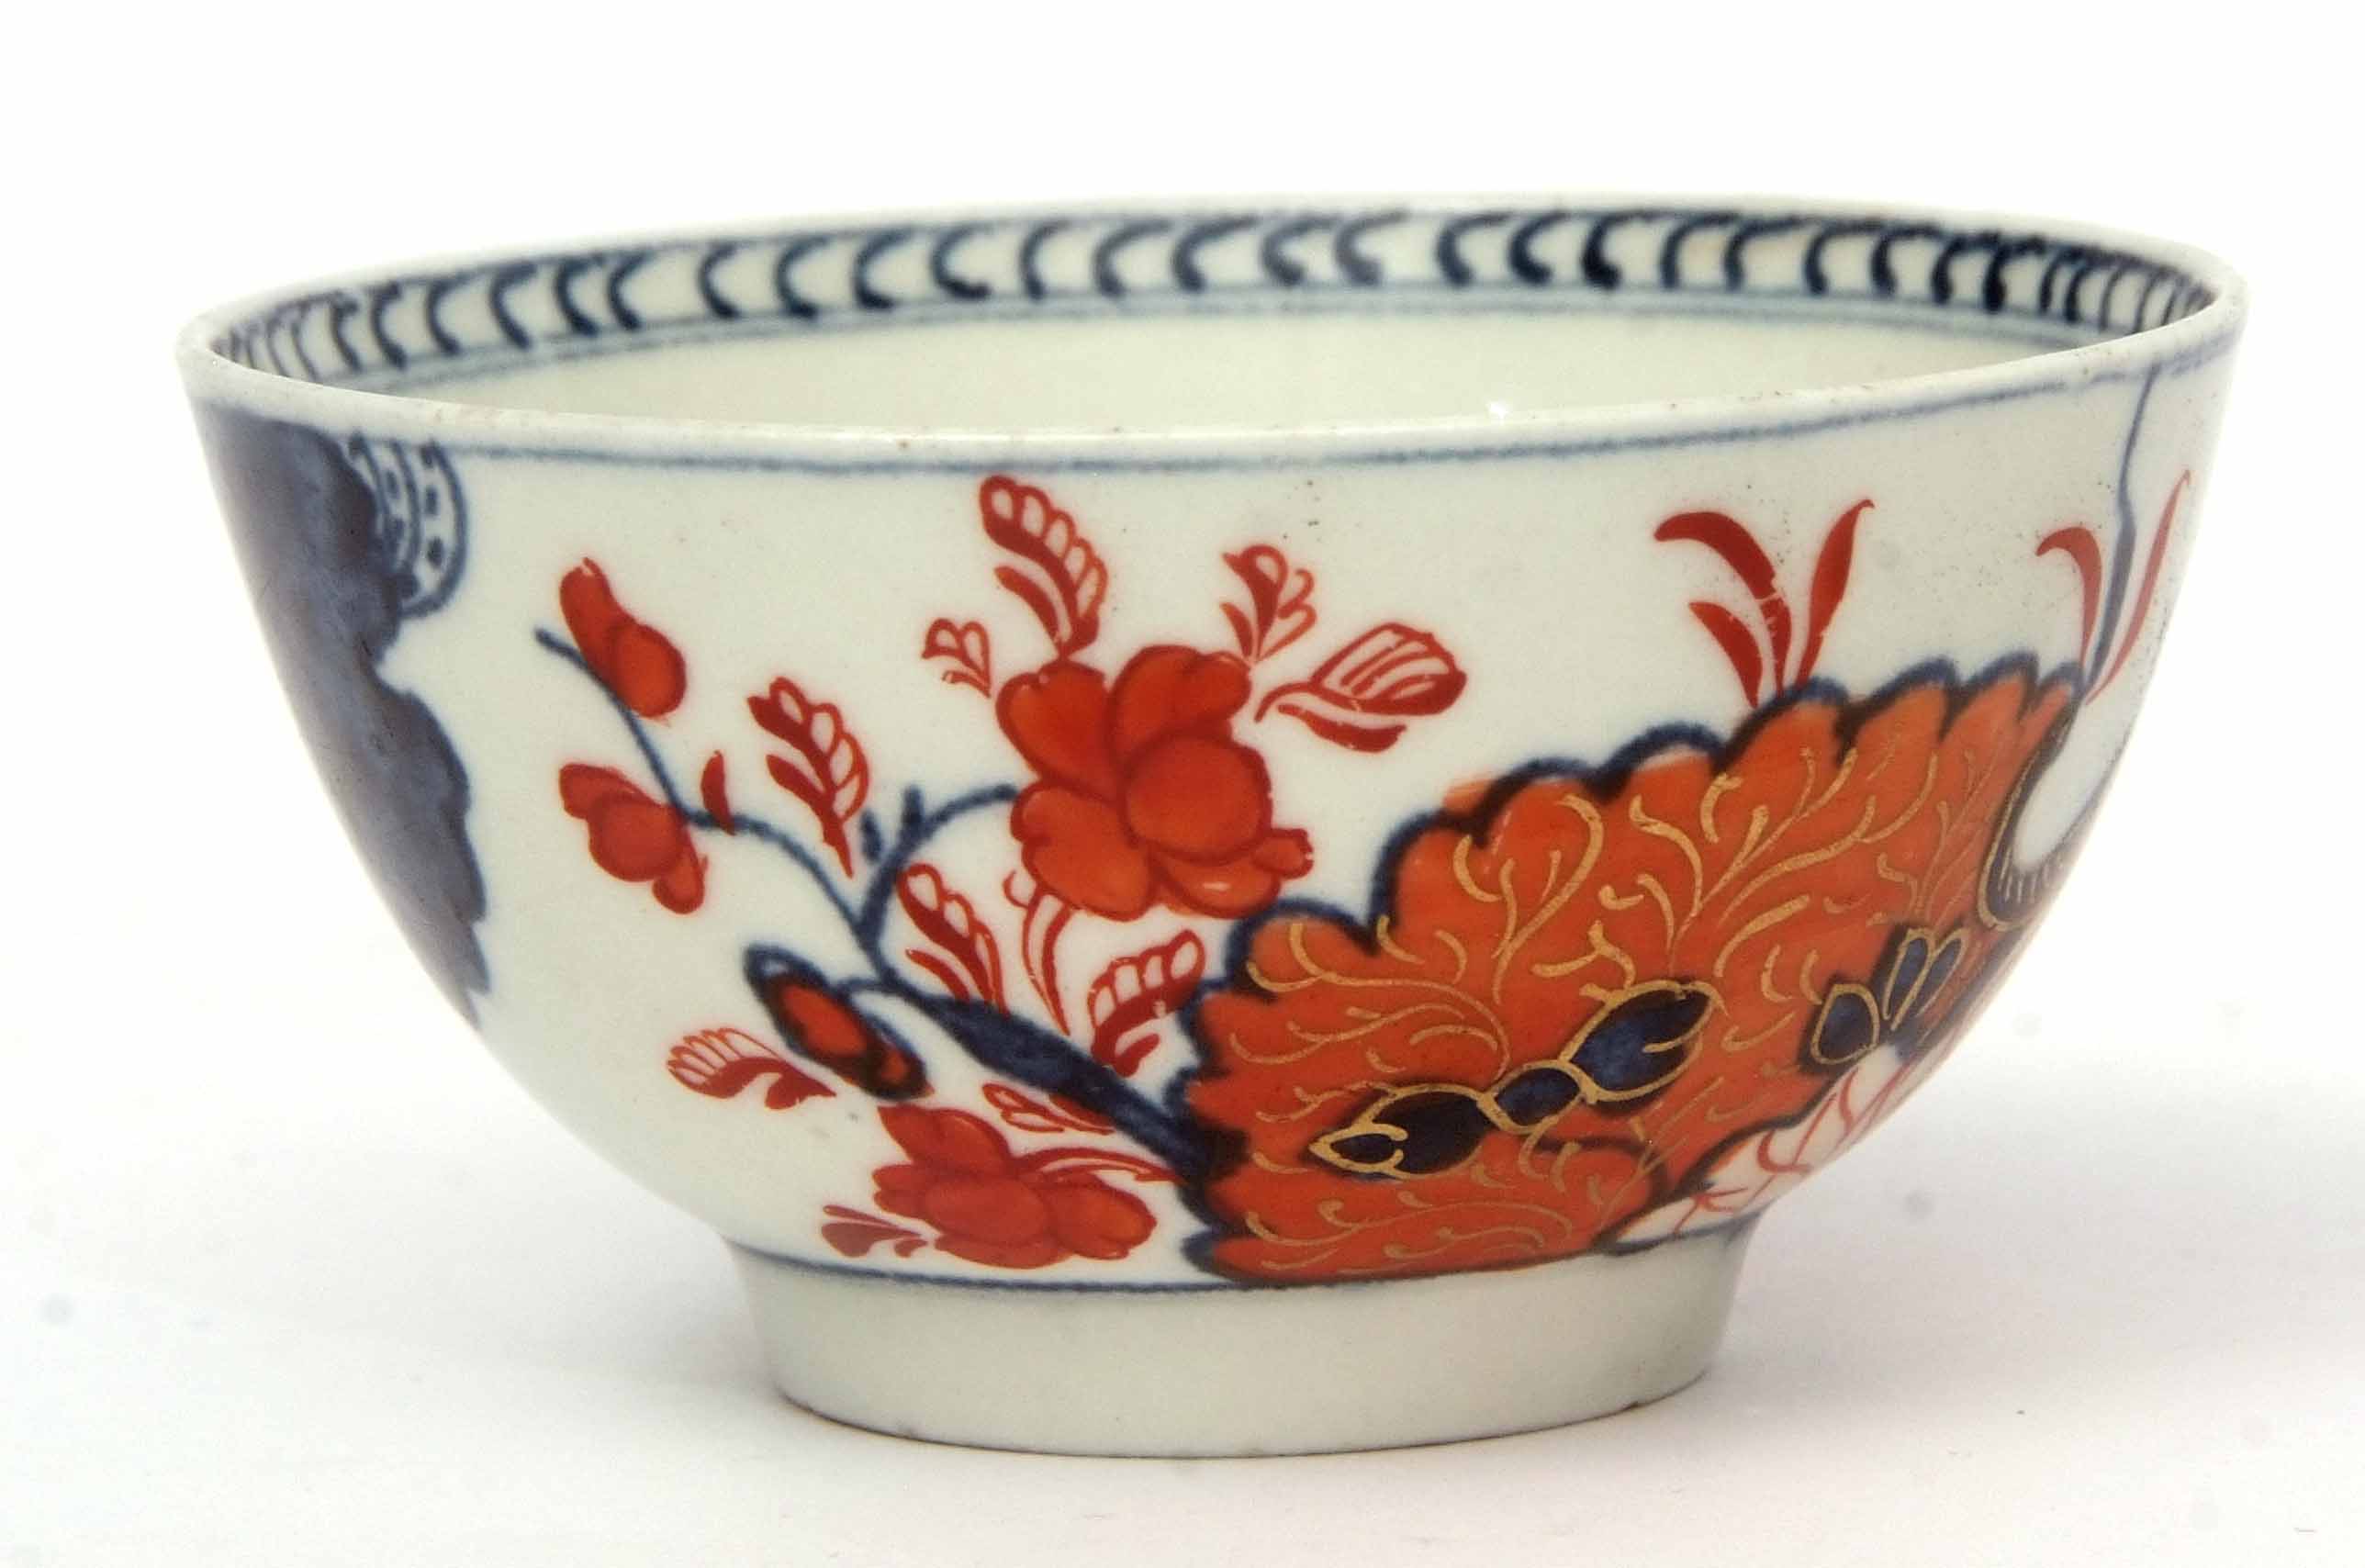 Unusual Lowestoft porcelain tea bowl and saucer with an Imari type tobacco leaf design in iron red - Image 4 of 5